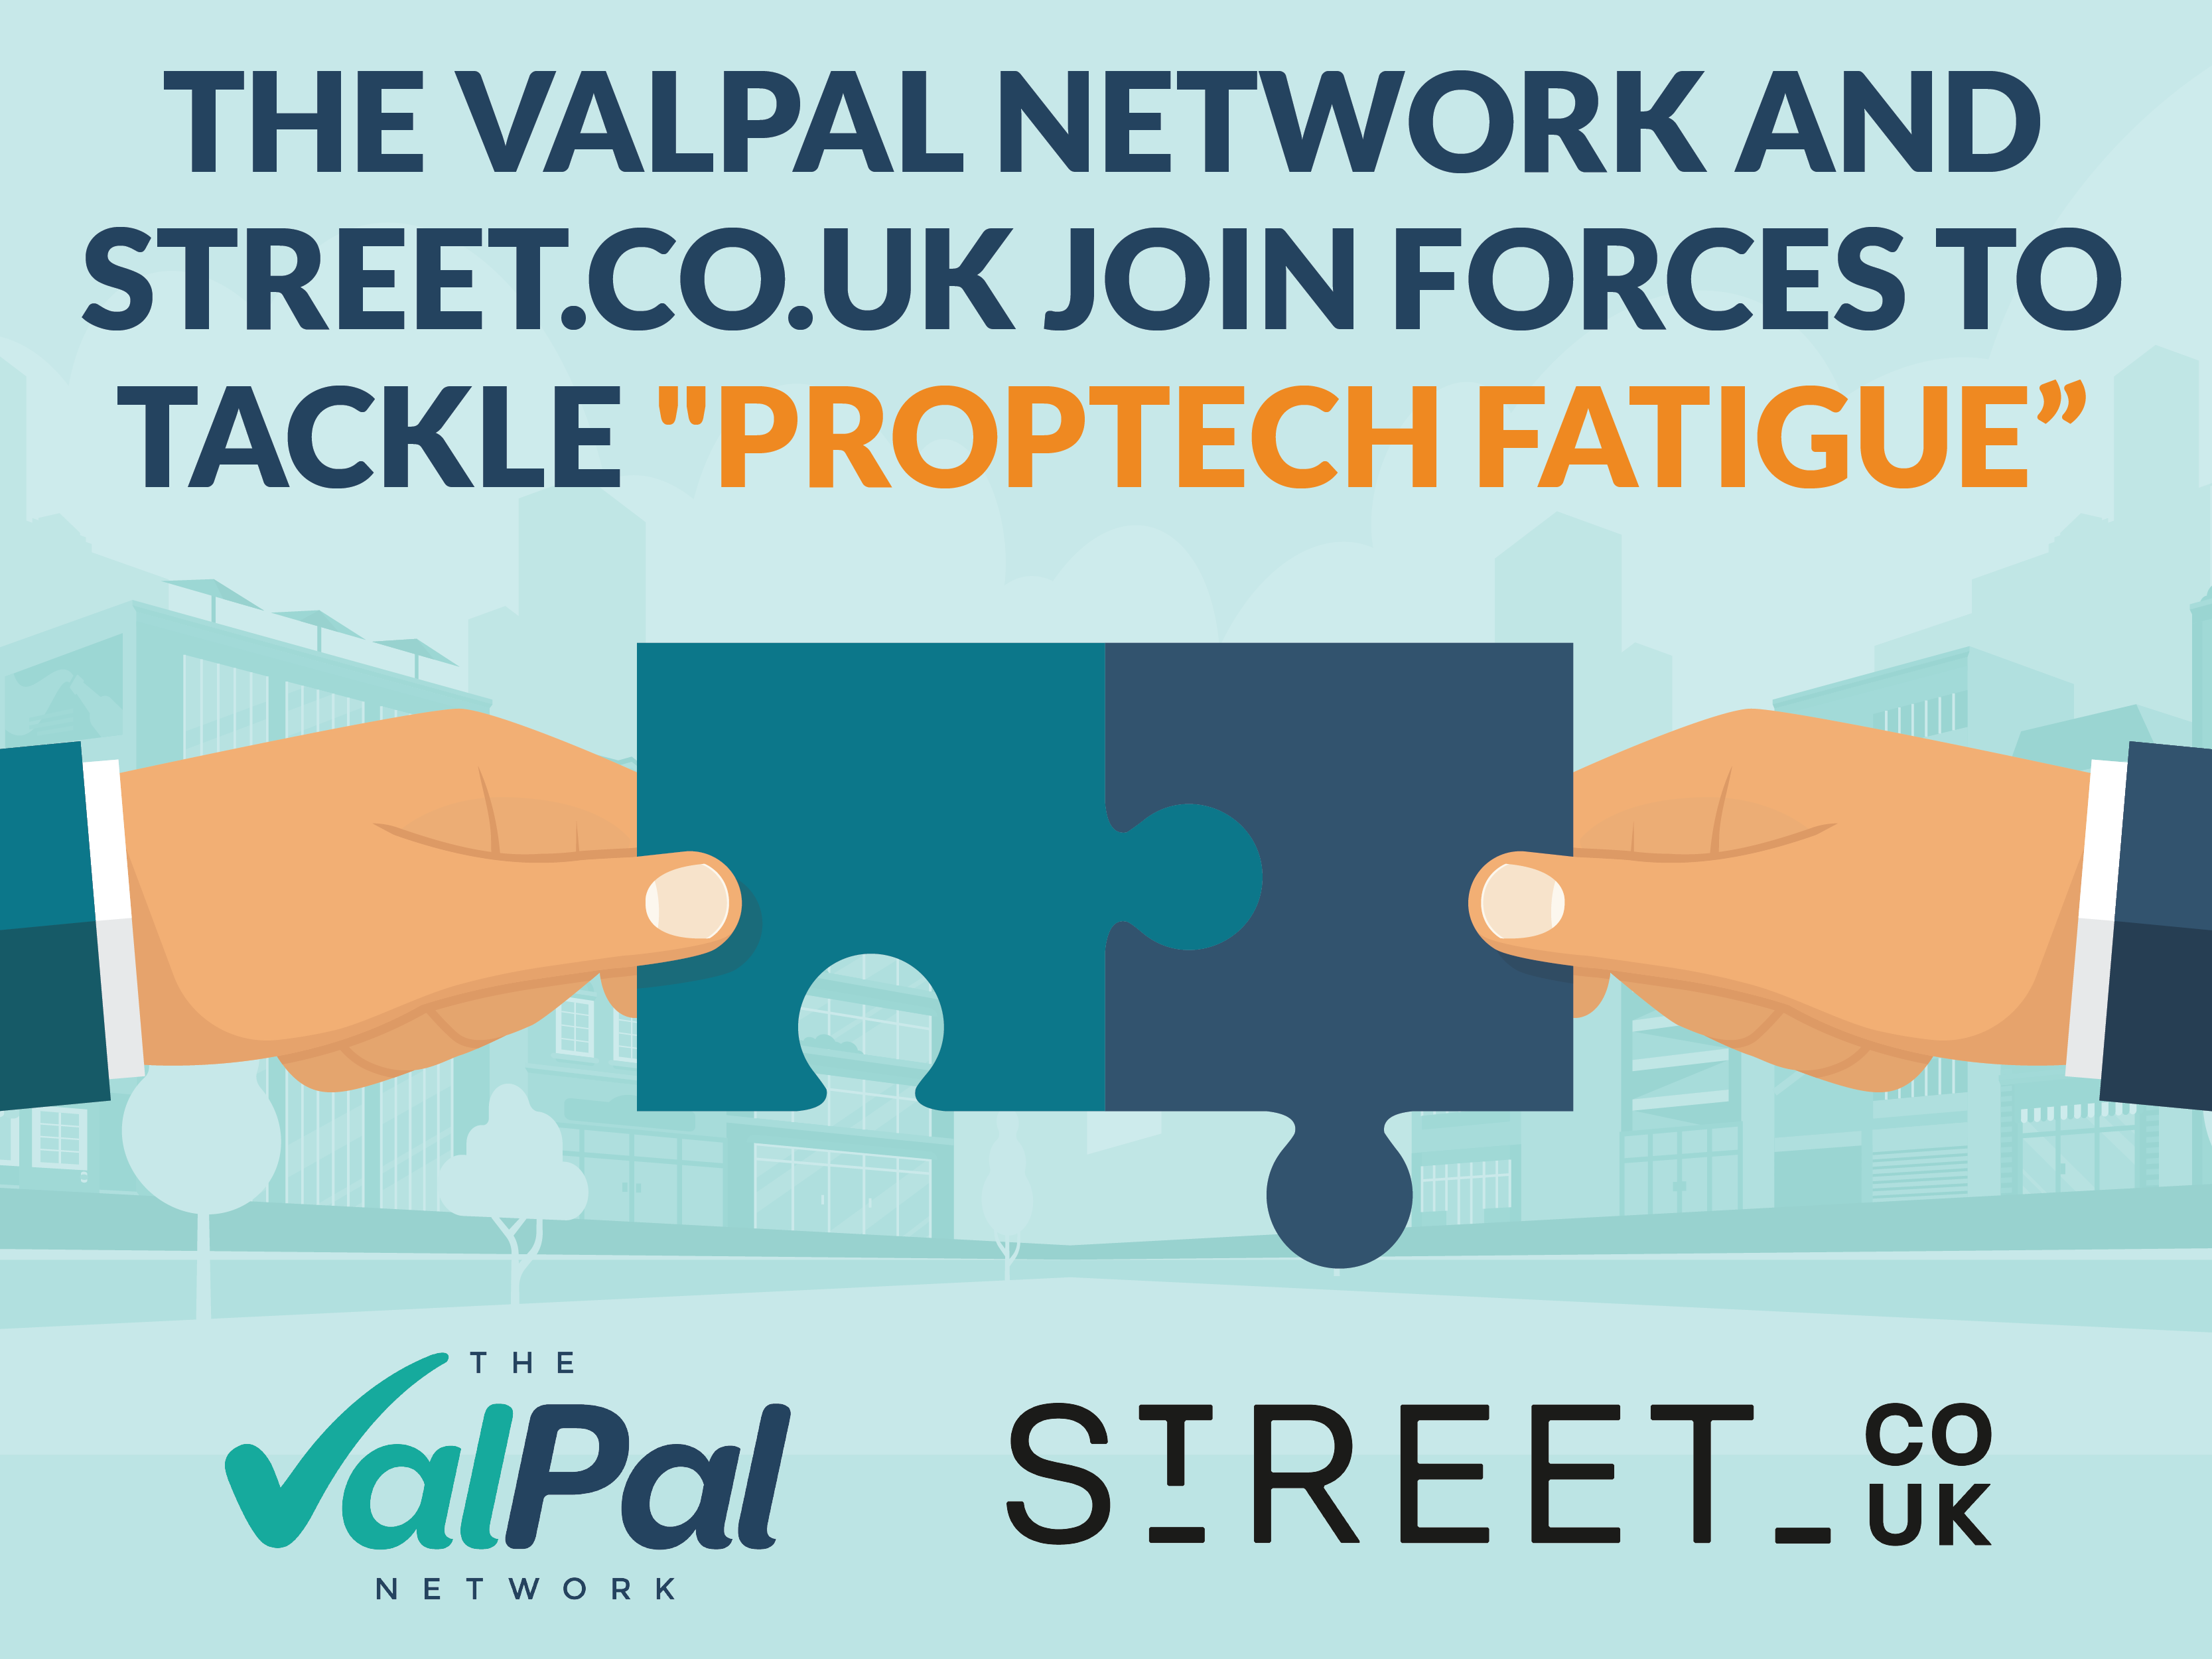 The ValPal Network and Street.co.uk Join Forces to Tackle 